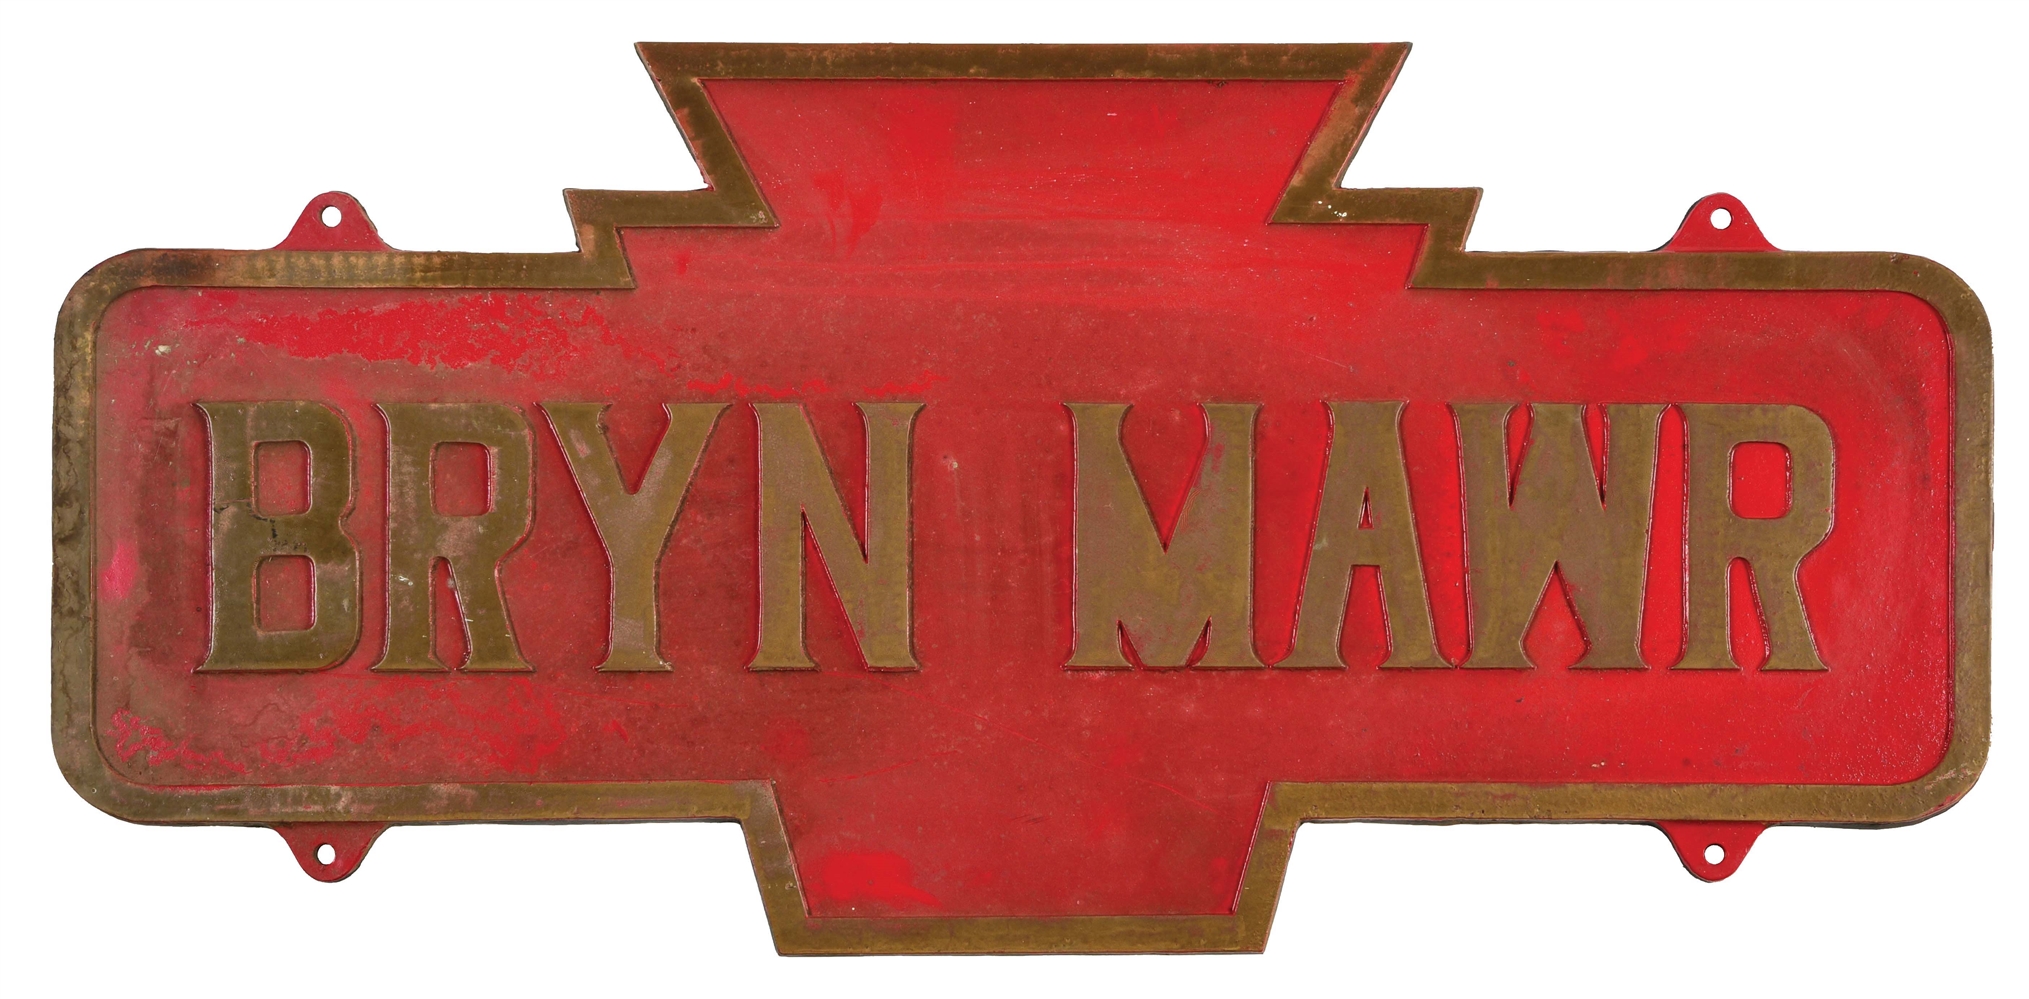 PRR STATION SIGN REPRODUCTION.